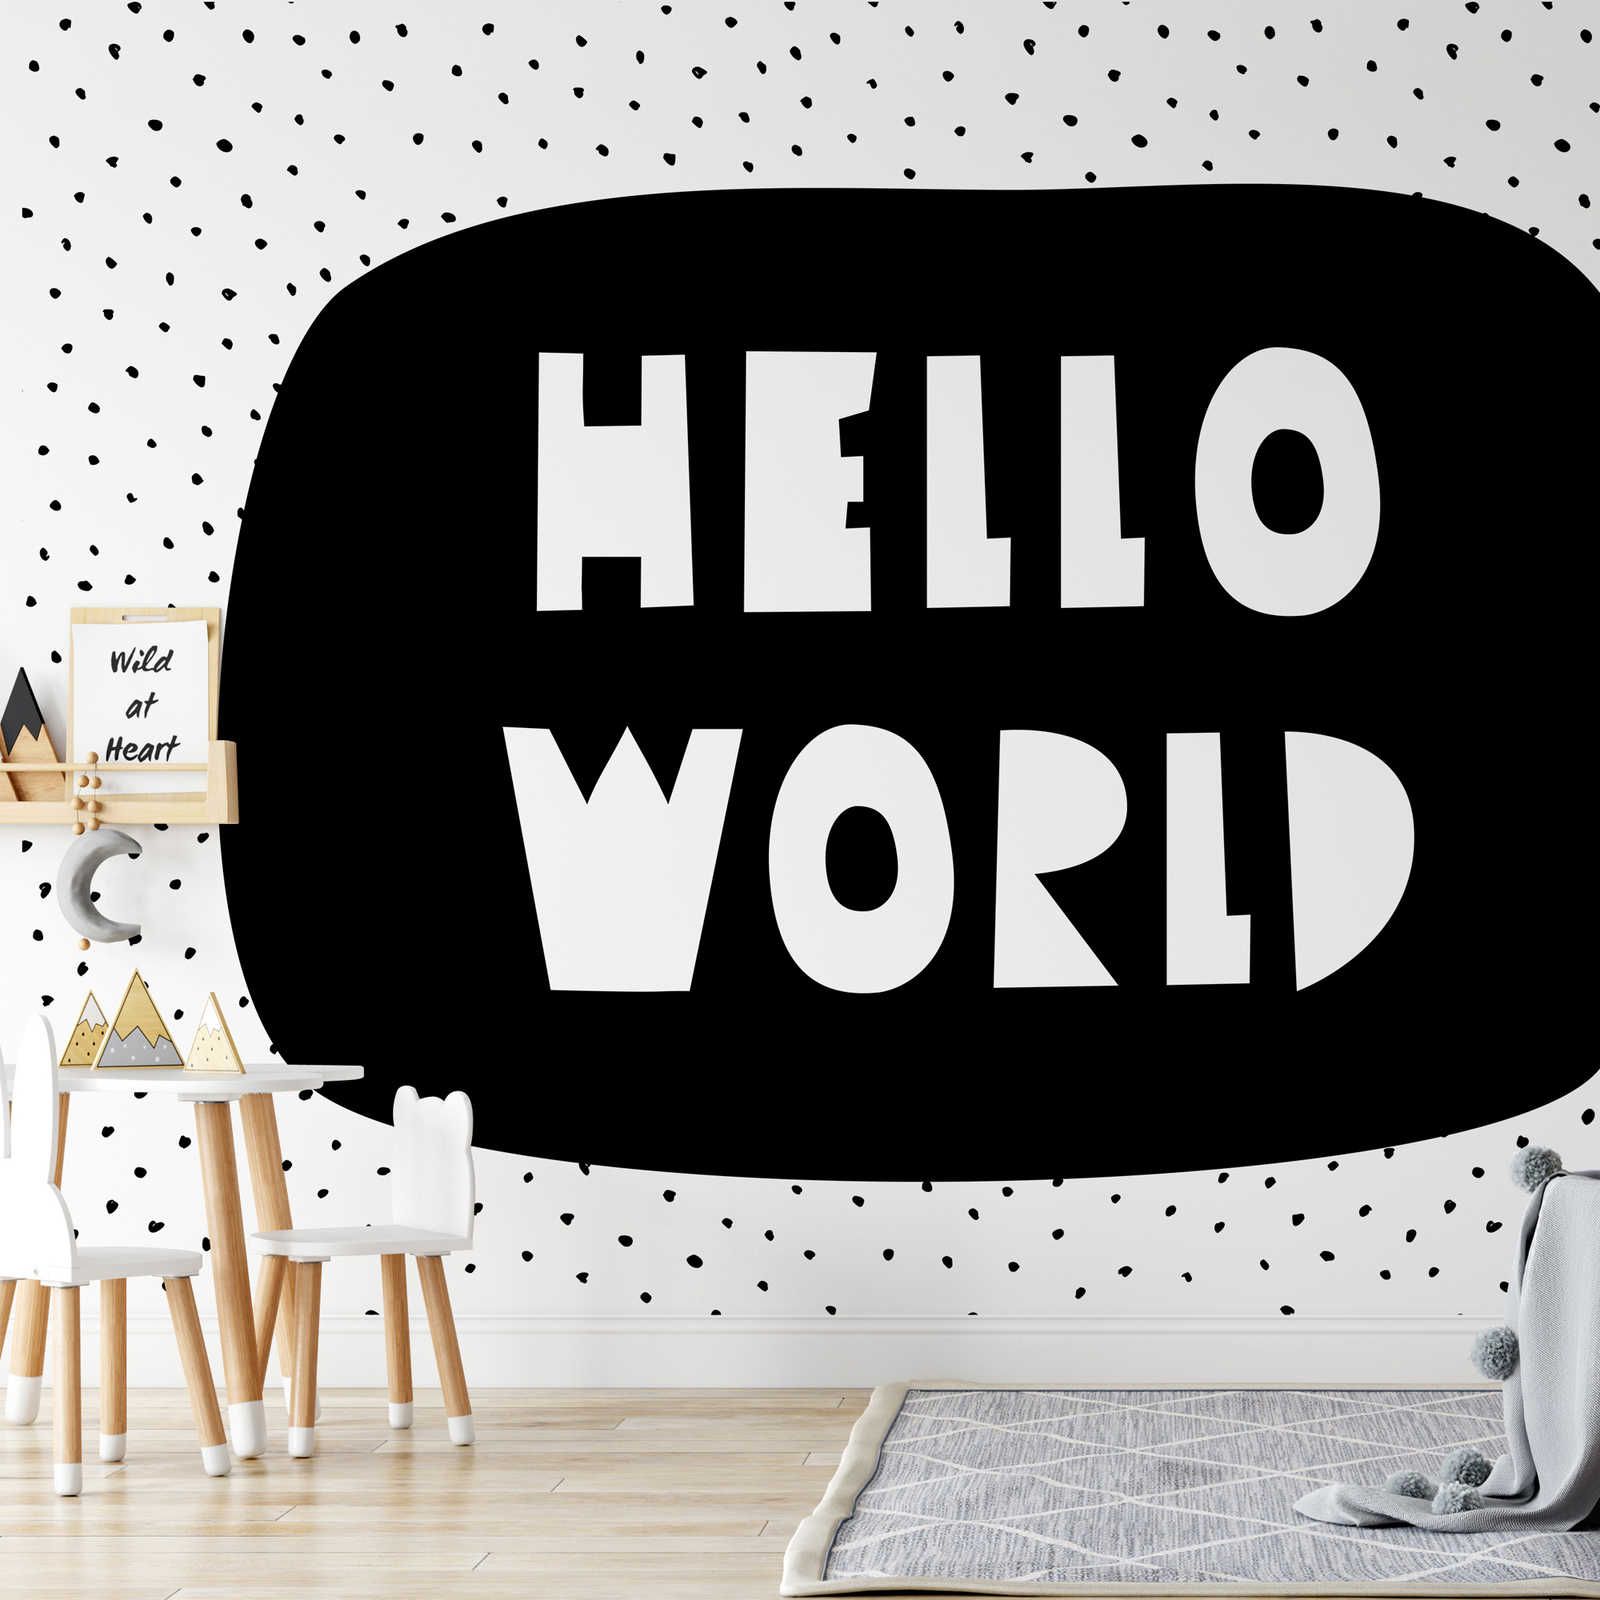 Photo wallpaper for children's room with lettering "Hello World" - Smooth & slightly shiny non-woven
